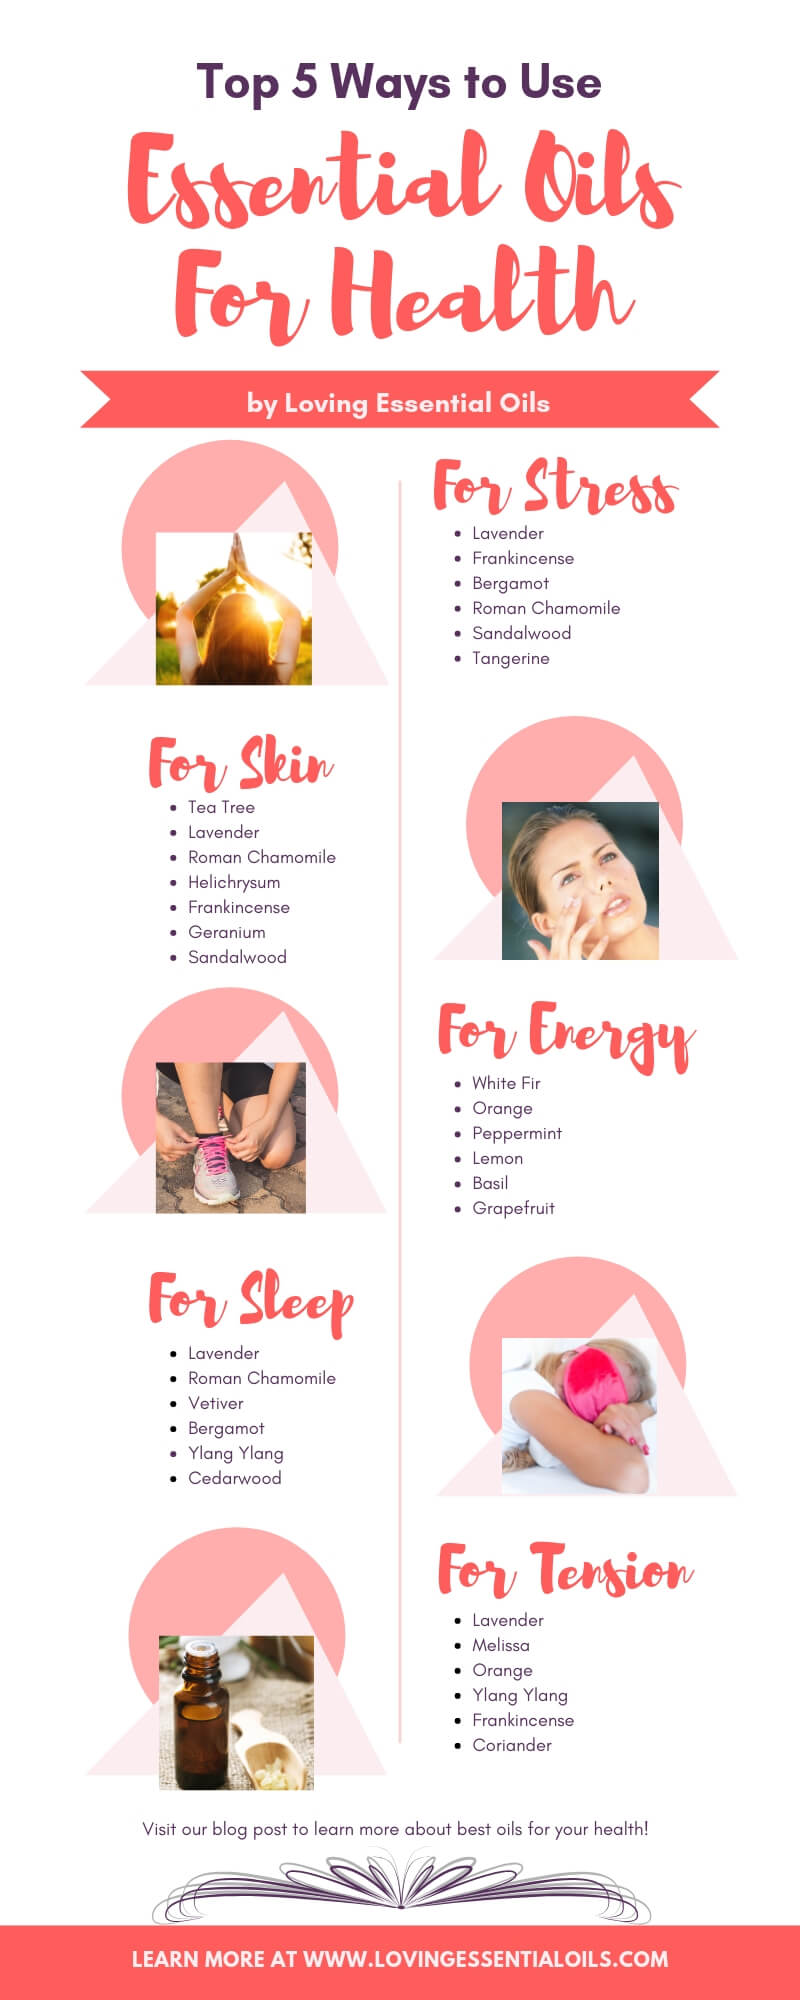 Top 5 Ways to Use Essential Oils For Health by Loving Essential Oils